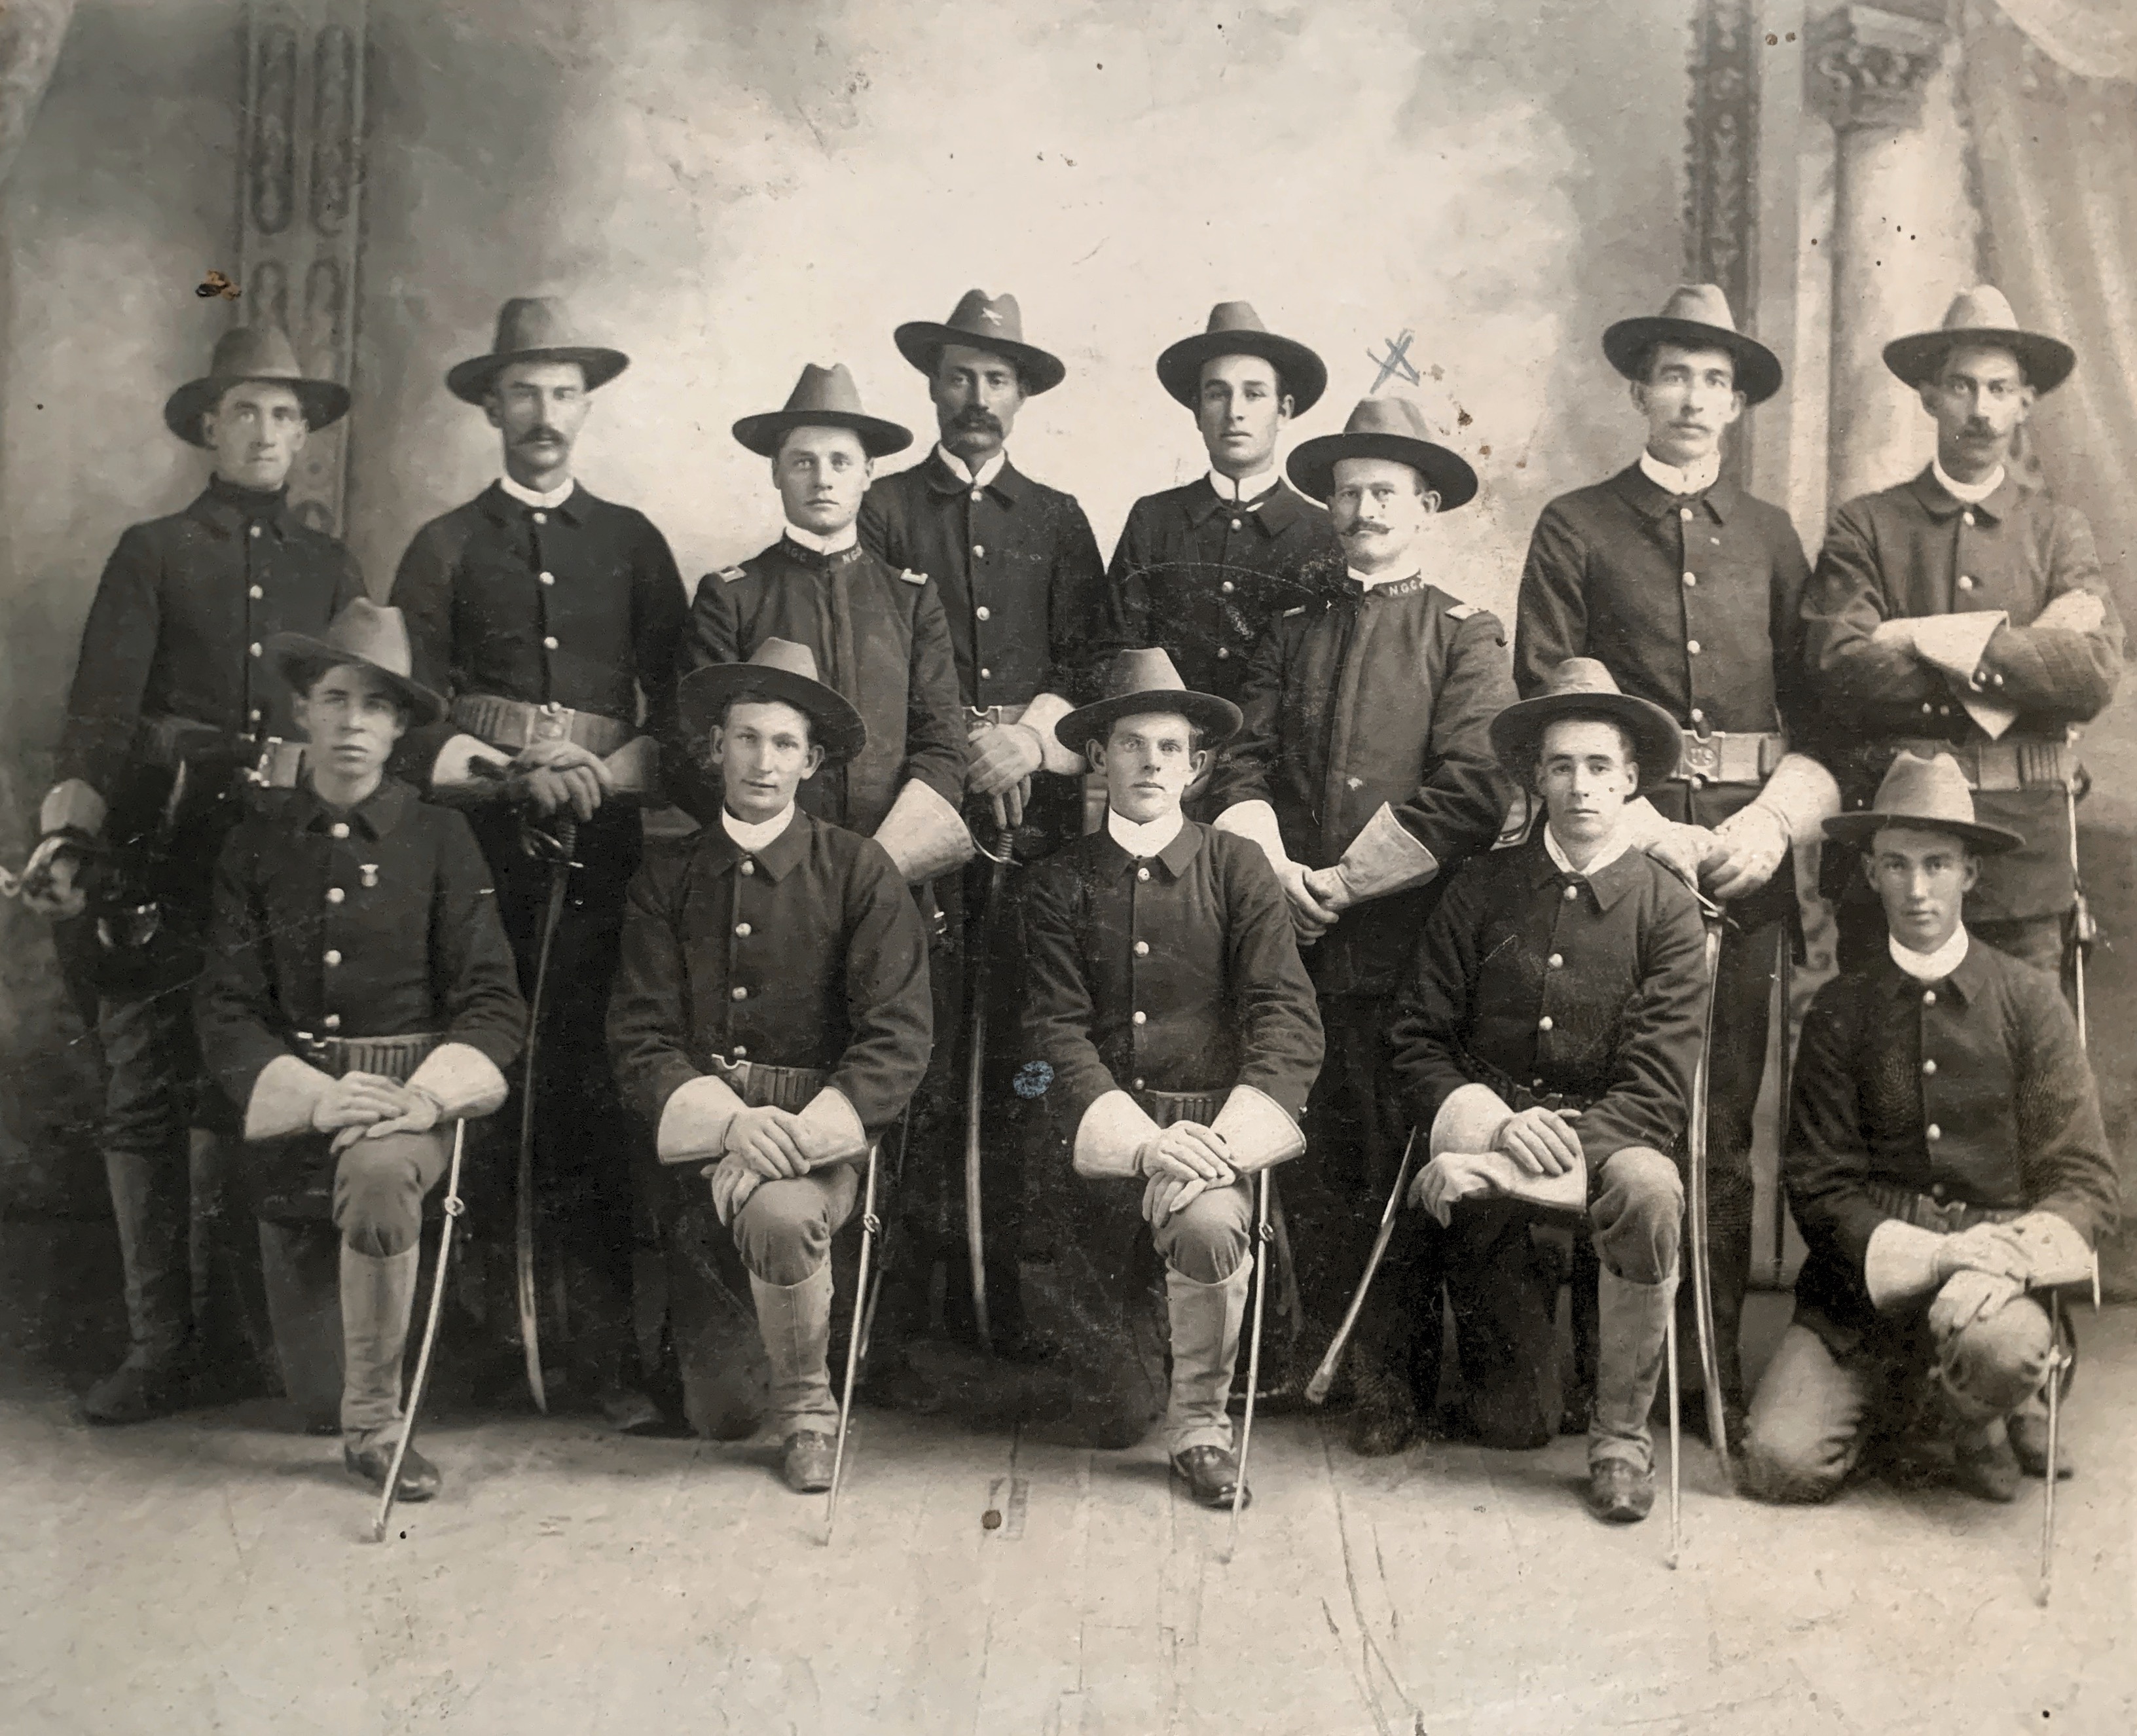 Troop A, 1898, awaiting orders to be sent to Cuba during the Spanish American war. Only got as far as Denver before the war was over.